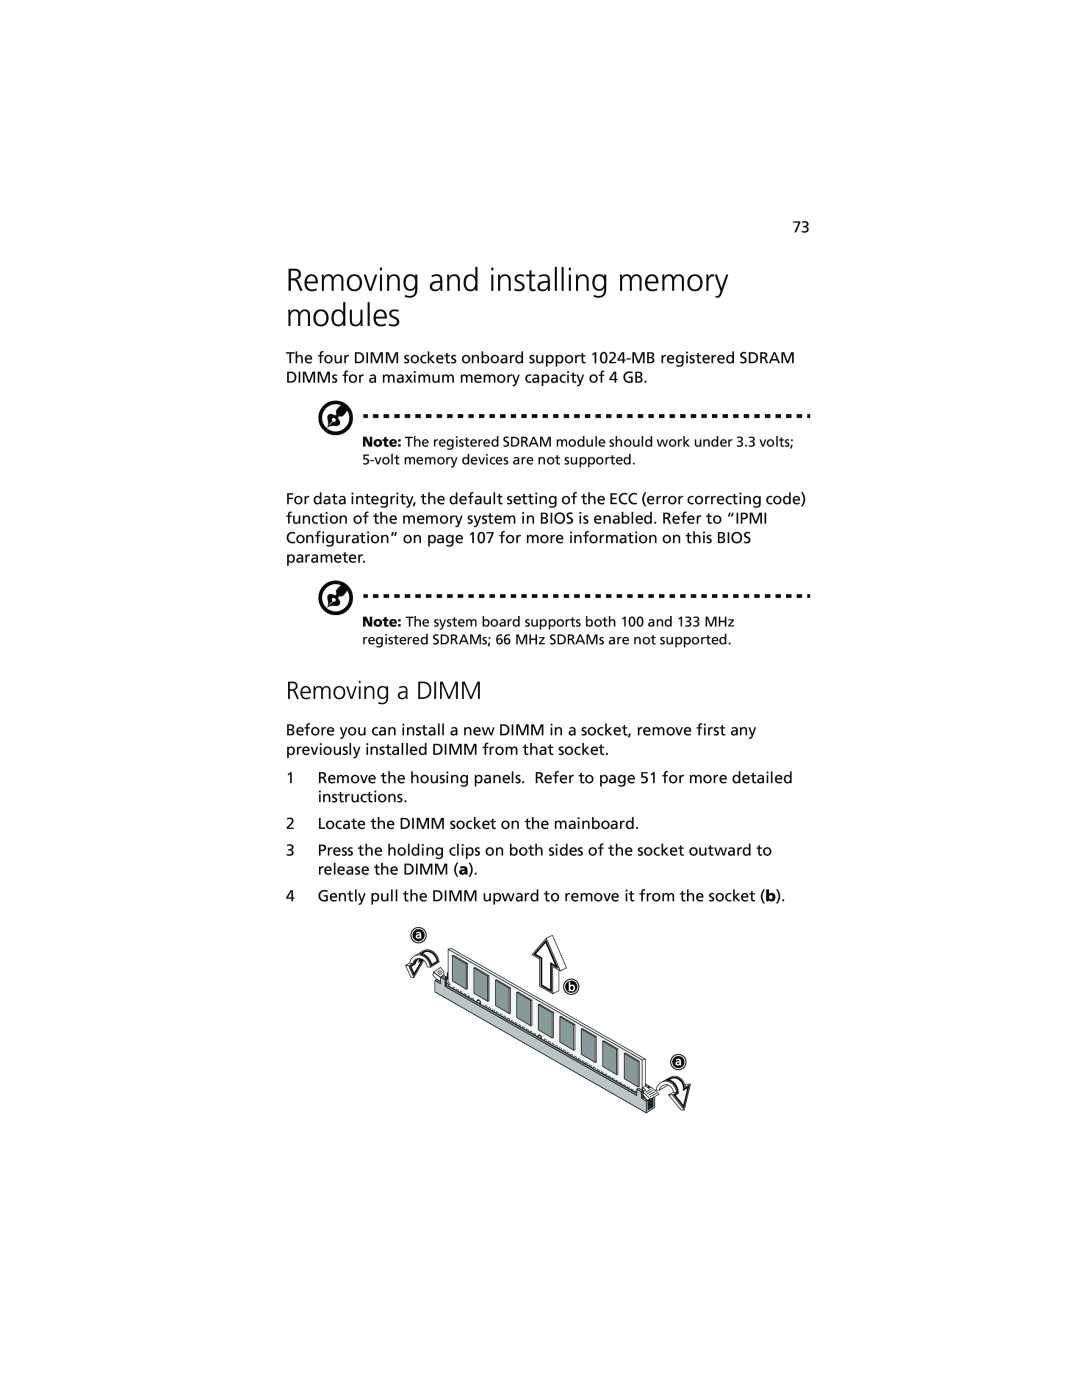 Acer Altos G610 manual Removing and installing memory modules, Removing a DIMM 